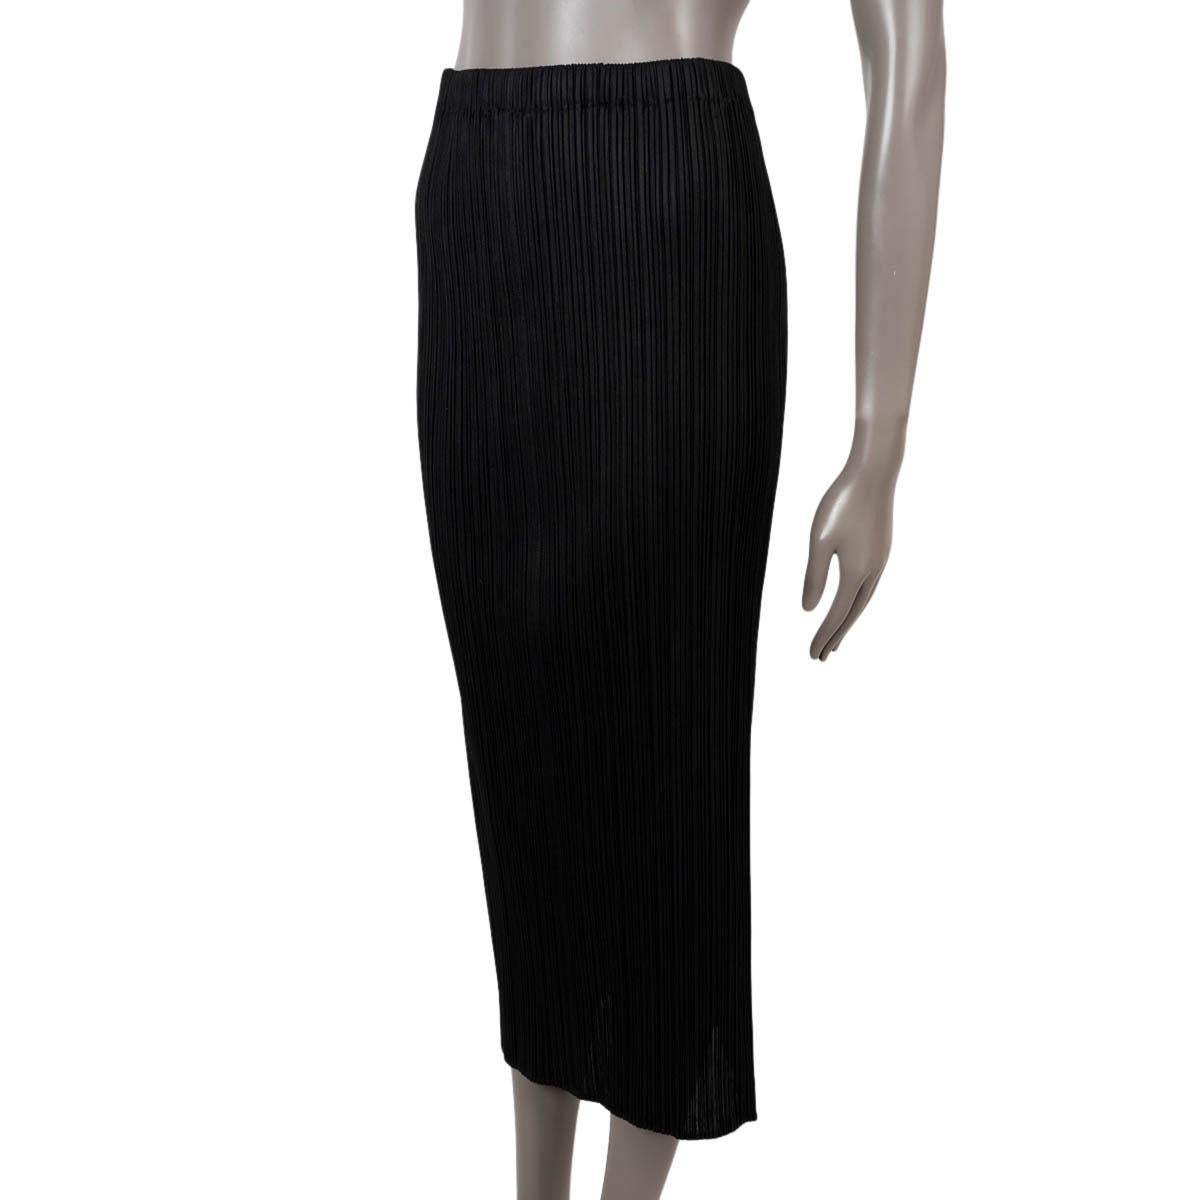 100% authentic Issey Miyake Pleats Please midi-skirt in black polyester (100%). Unlined. Has been worn and is in excellent condition. 

Measurements
Tag Size	2
Size	S
Waist From	66cm (25.7in)
Hips From	86cm (33.5in)
Length	86cm (33.5in)

All our